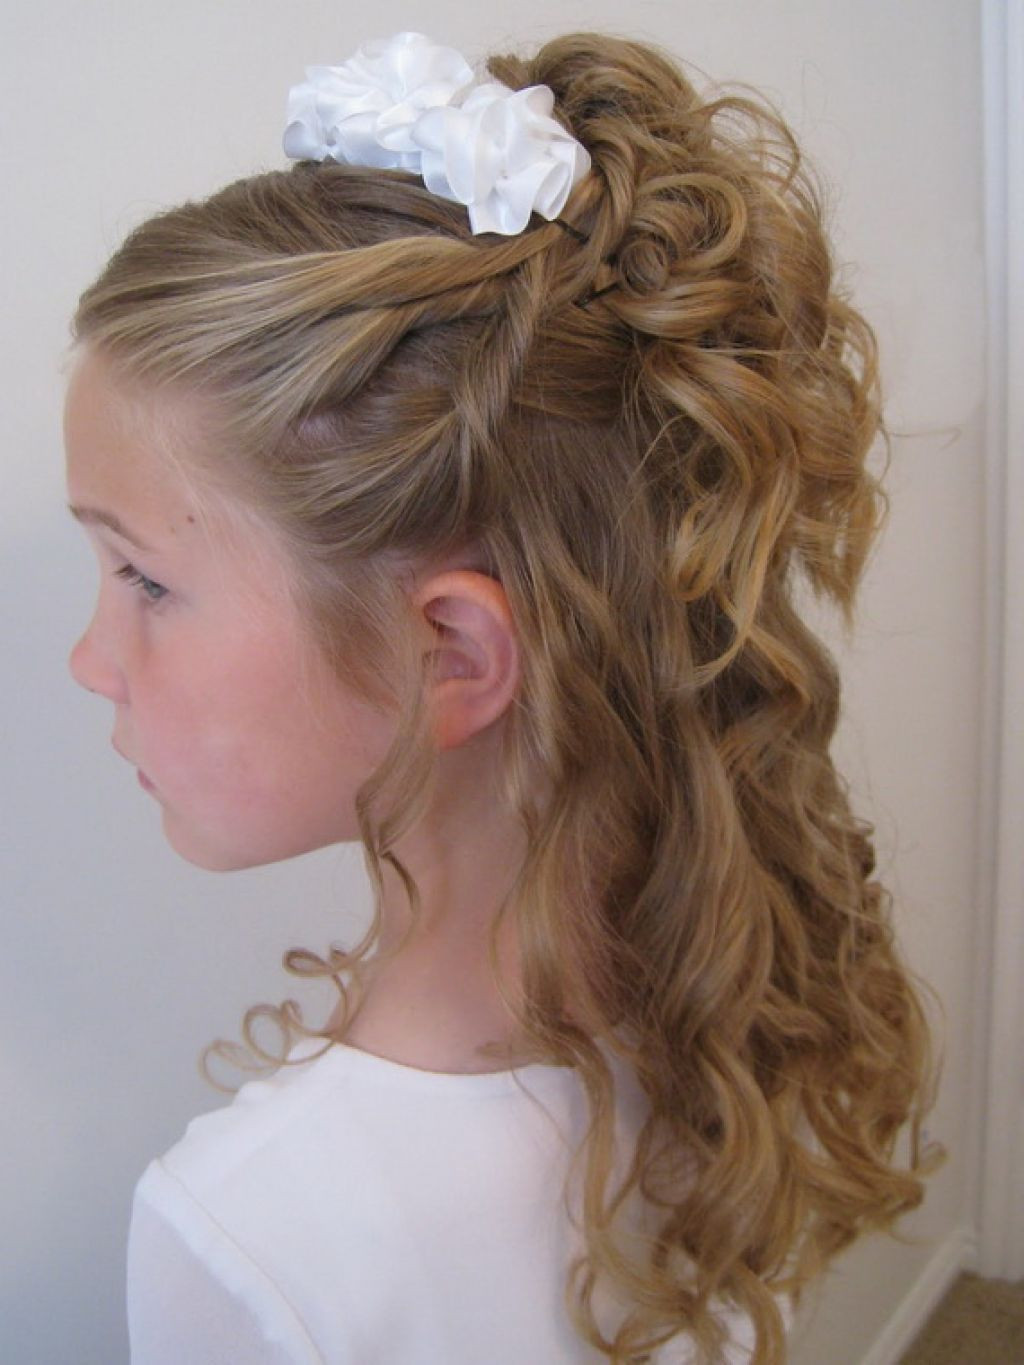 Hairstyles For Little Girls For Wedding
 20 Wedding Hairstyles For Kids Ideas wedding